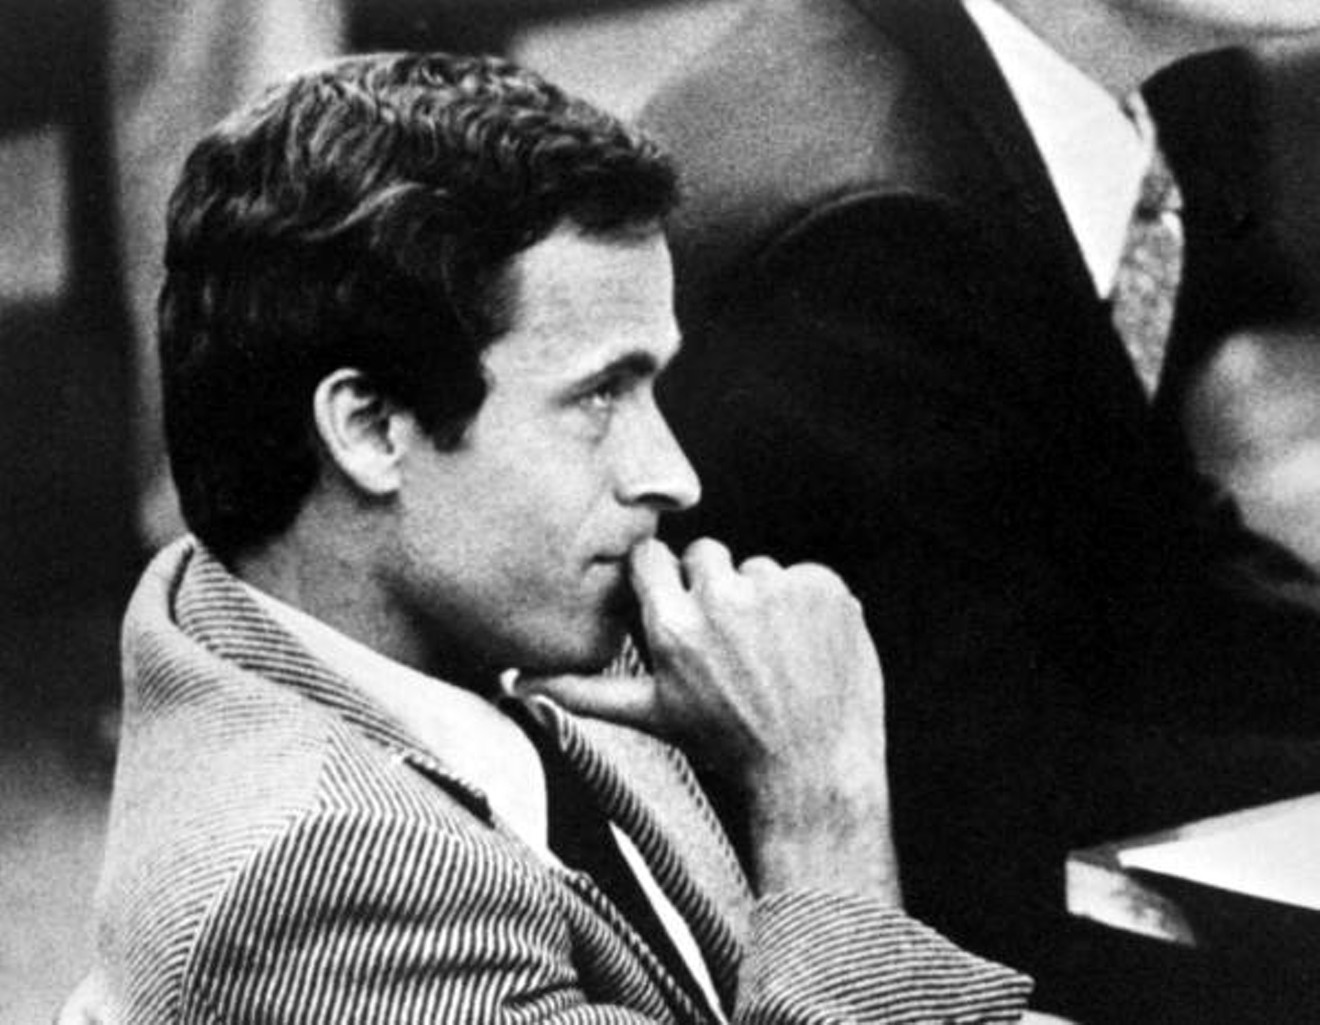 Ted Bundy in a courtroom in 1979.